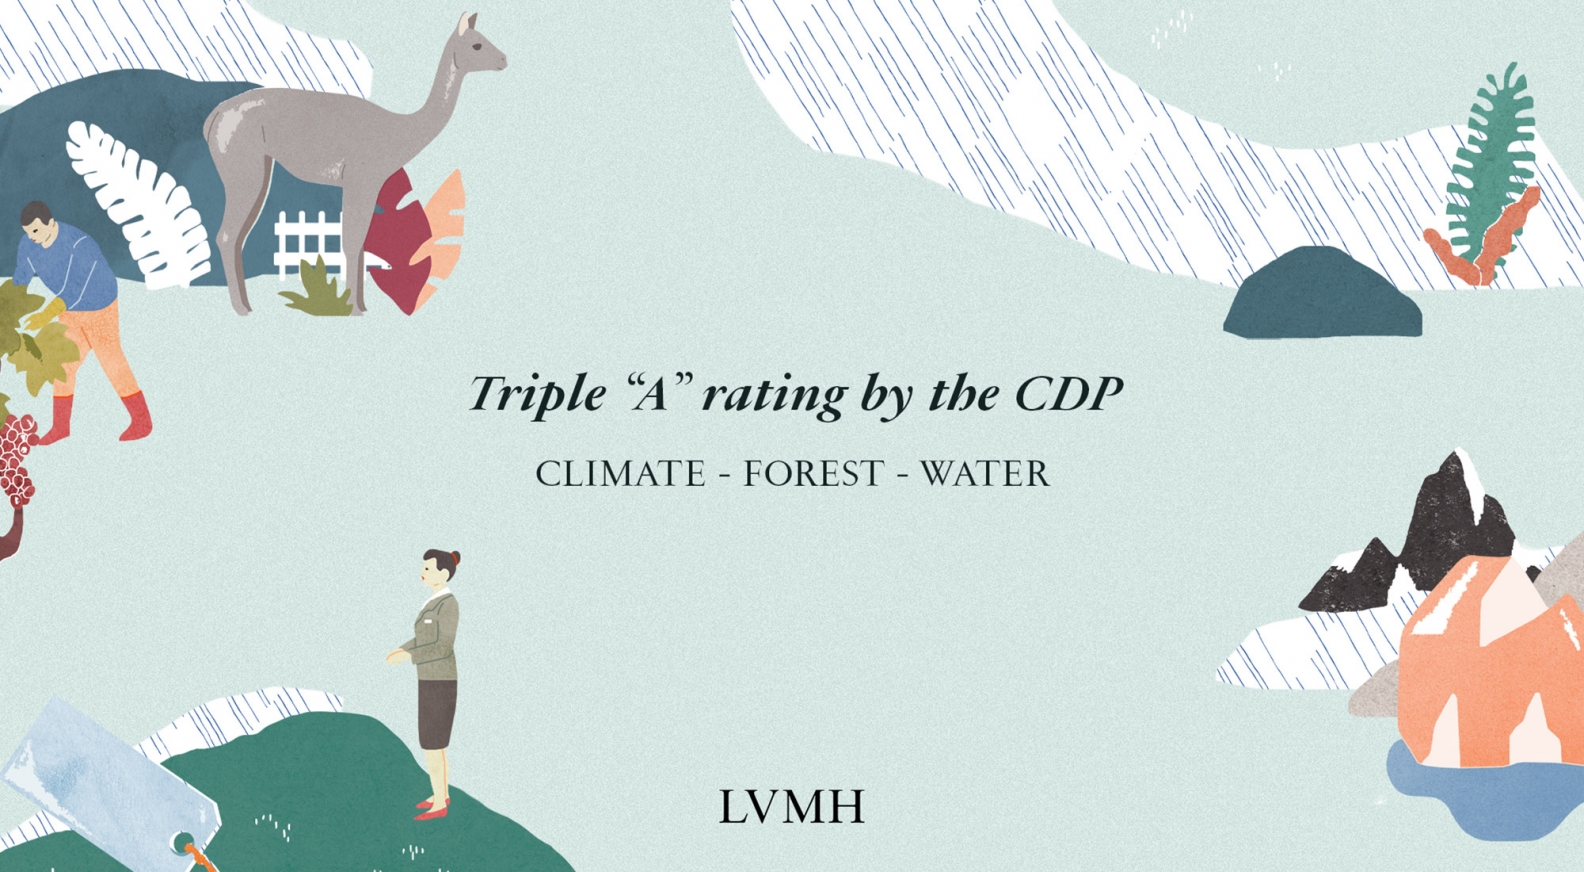 LVMH is awarded the prestigious triple “A” rating by the CDP for its  leadership in terms of climate, forest and water protection - LVMH